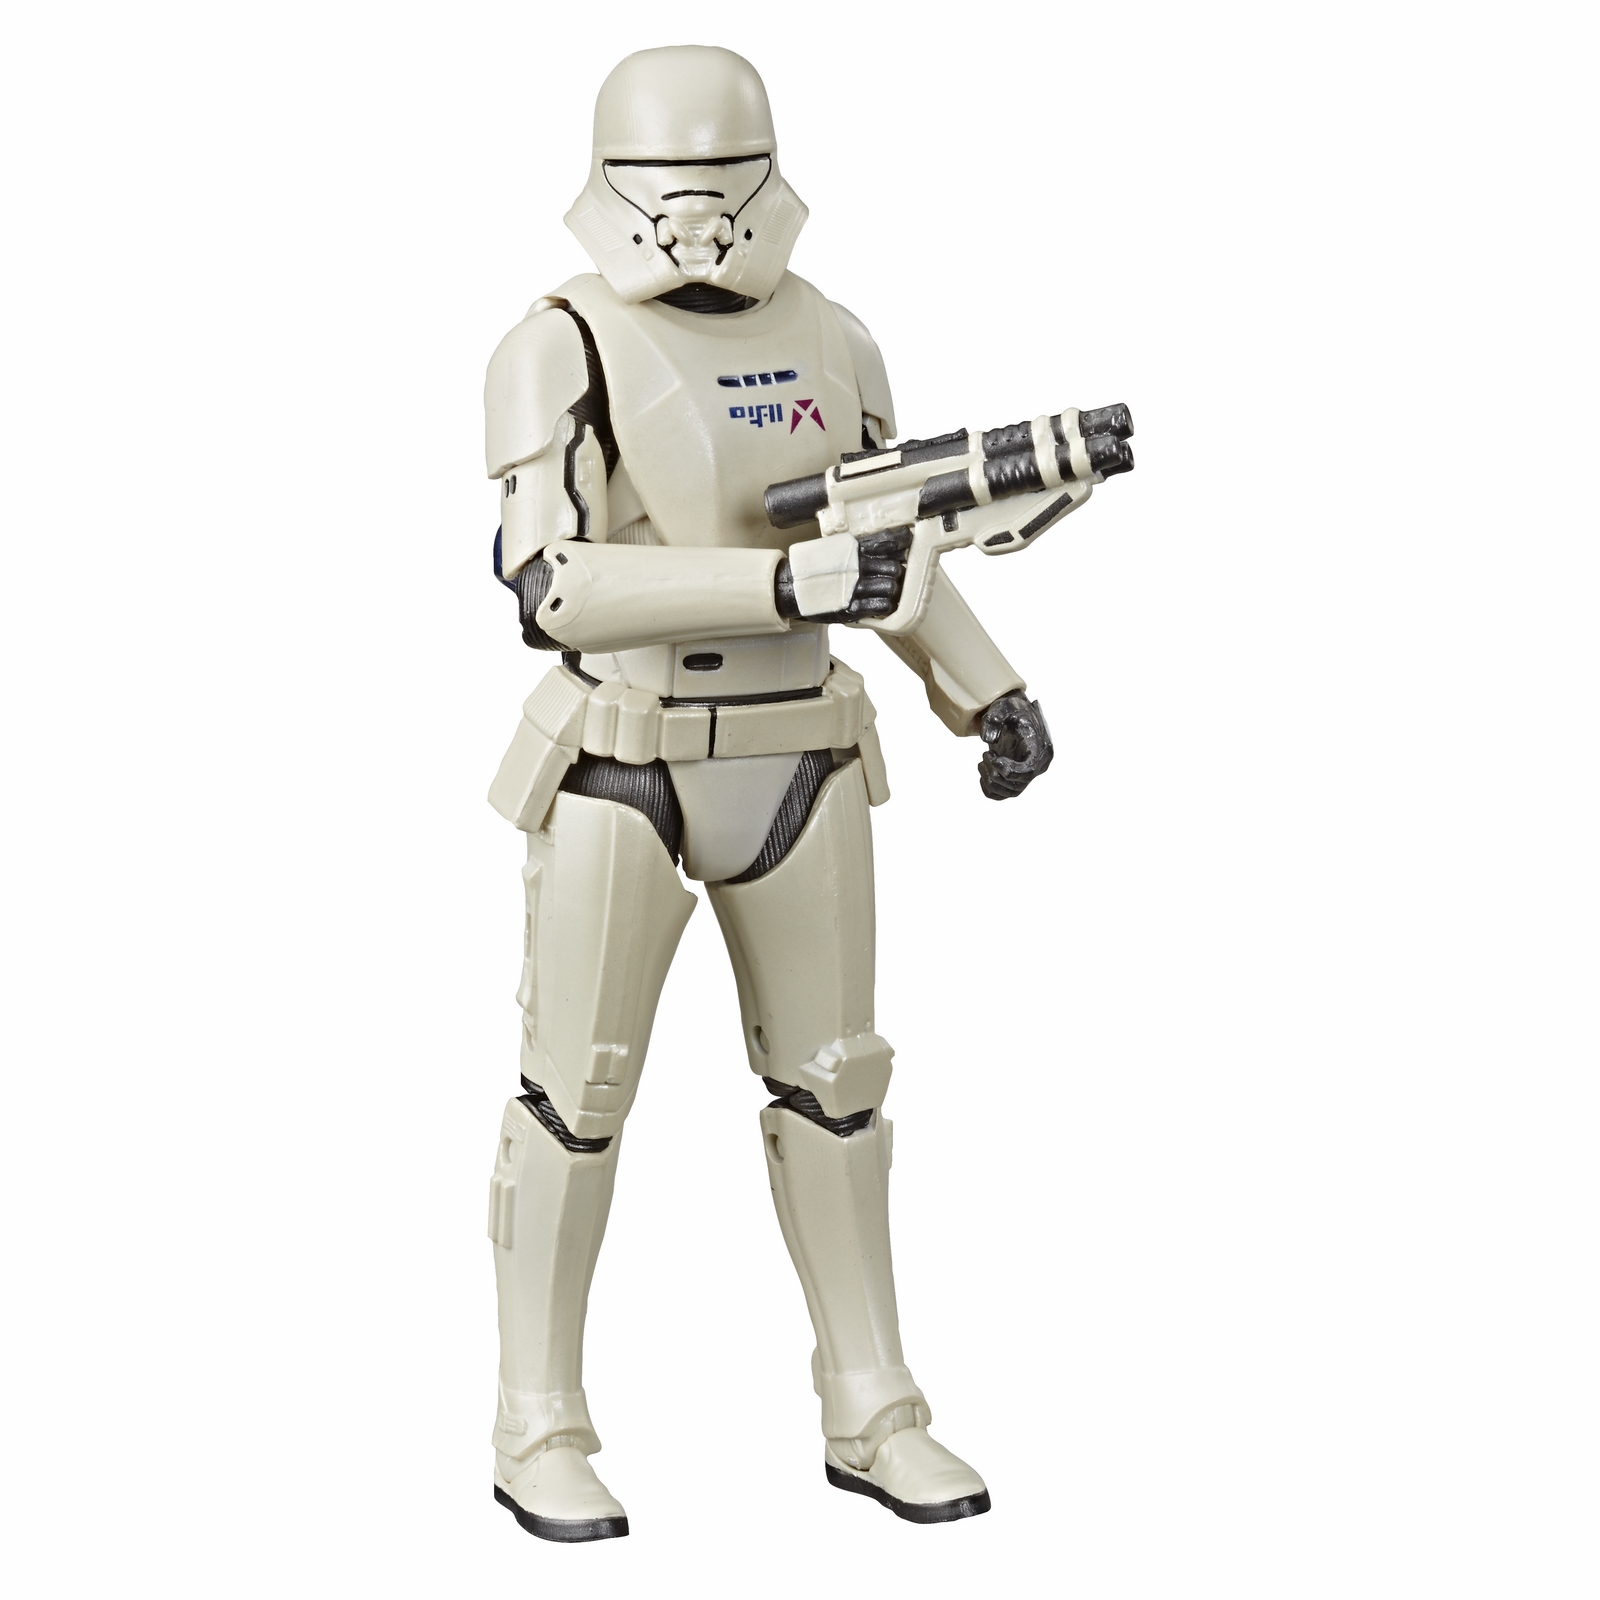 STAR%20WARS%20THE%20BLACK%20SERIES%206-INCH%20FIRST%20ORDER%20JET%20TROOPER%20CARBONIZED%20COLLECTION%20Figure%20-%20oop.jpg